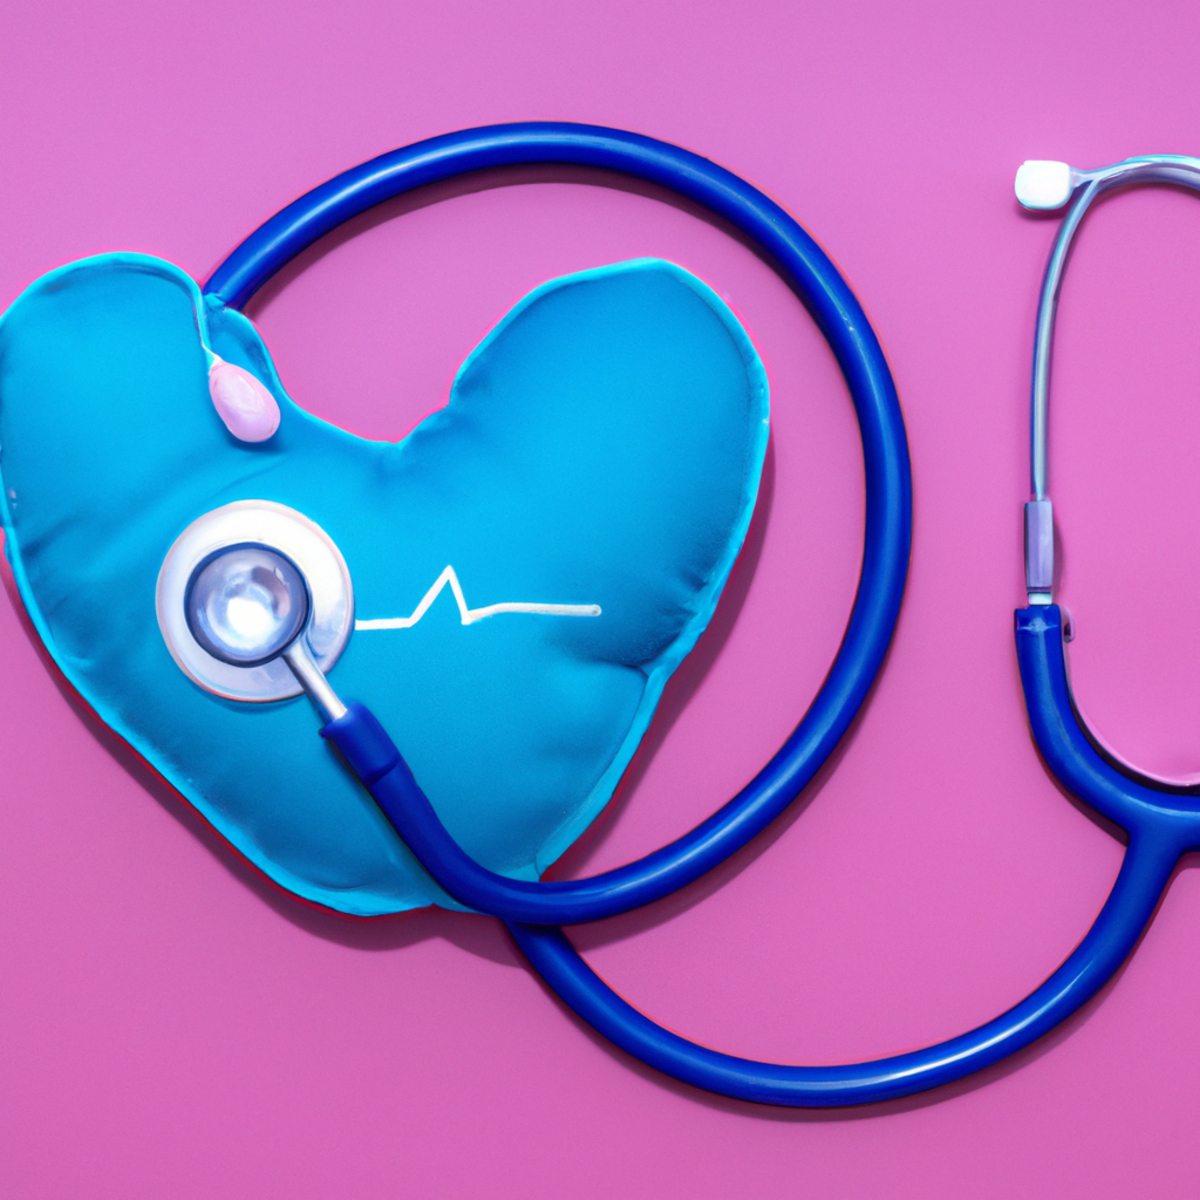 Stethoscope on heart-shaped pillow symbolizes connection between medical care and challenges of living with Arrhythmogenic Right Ventricular Dysplasia (ARVD)